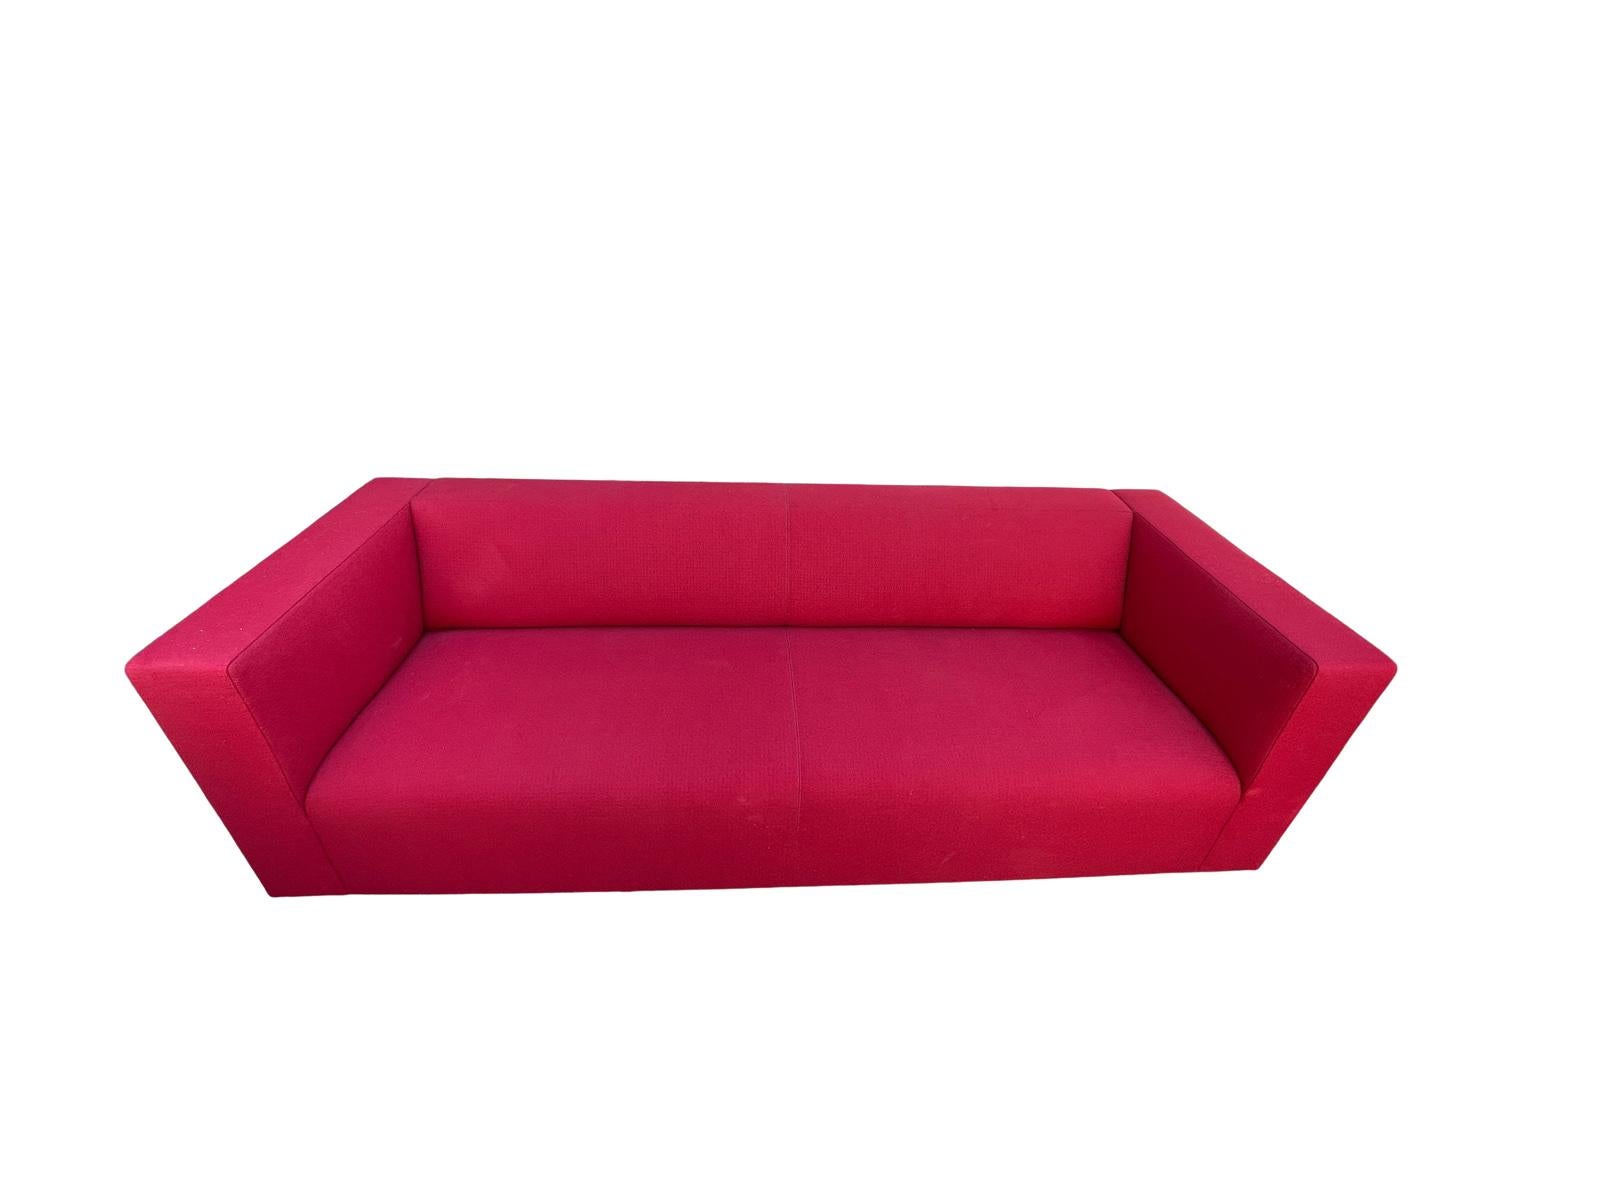 American Edward Barber & Jay Osgerby Red Sofa For Knoll For Sale